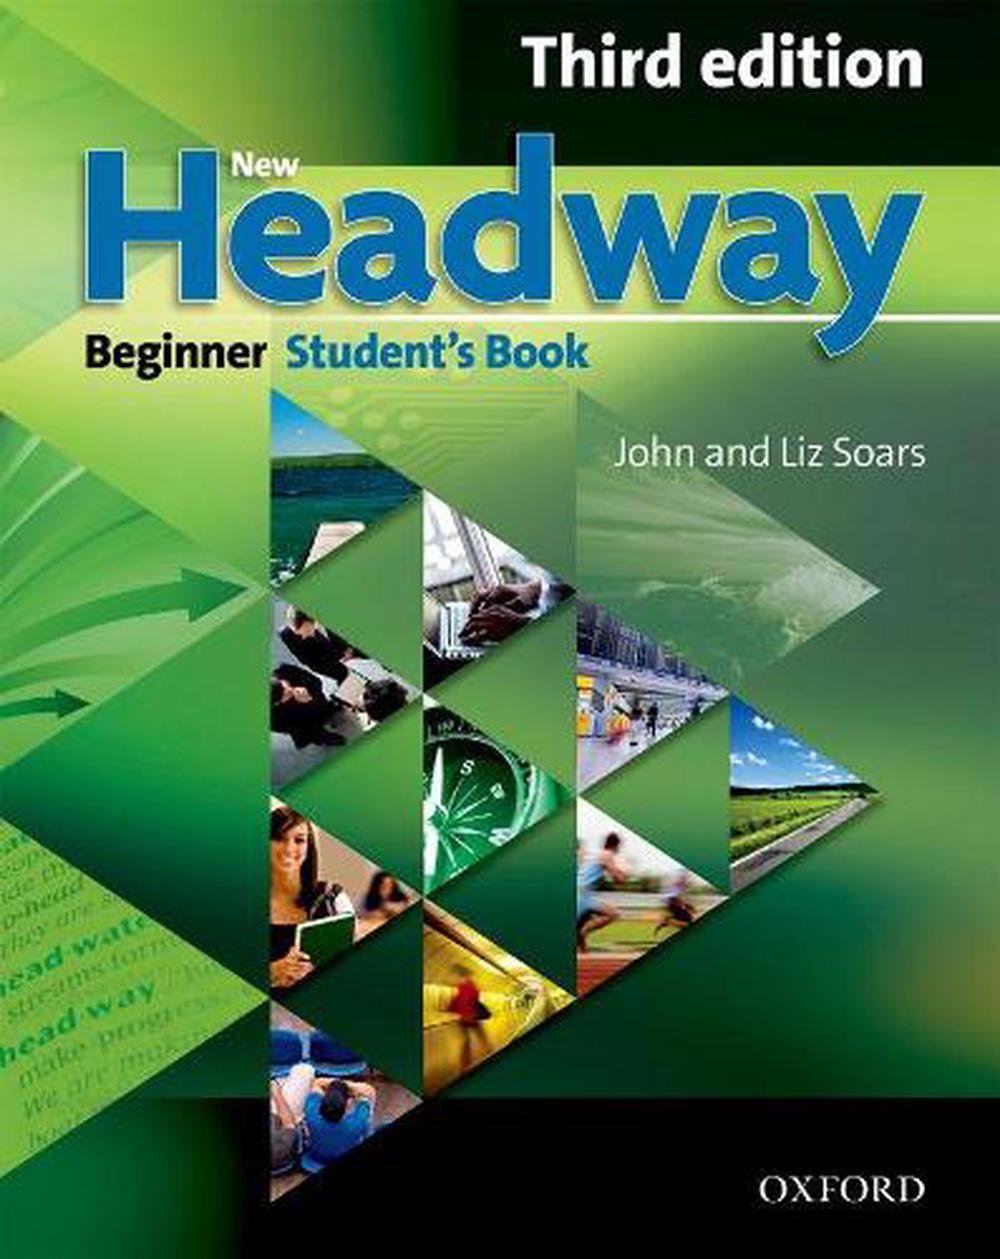 Nile　Paperback,　Soars,　New　Buy　by　9780194714563　Student's　online　Third　Headway:　Beginner　The　John　Edition:　Book　at